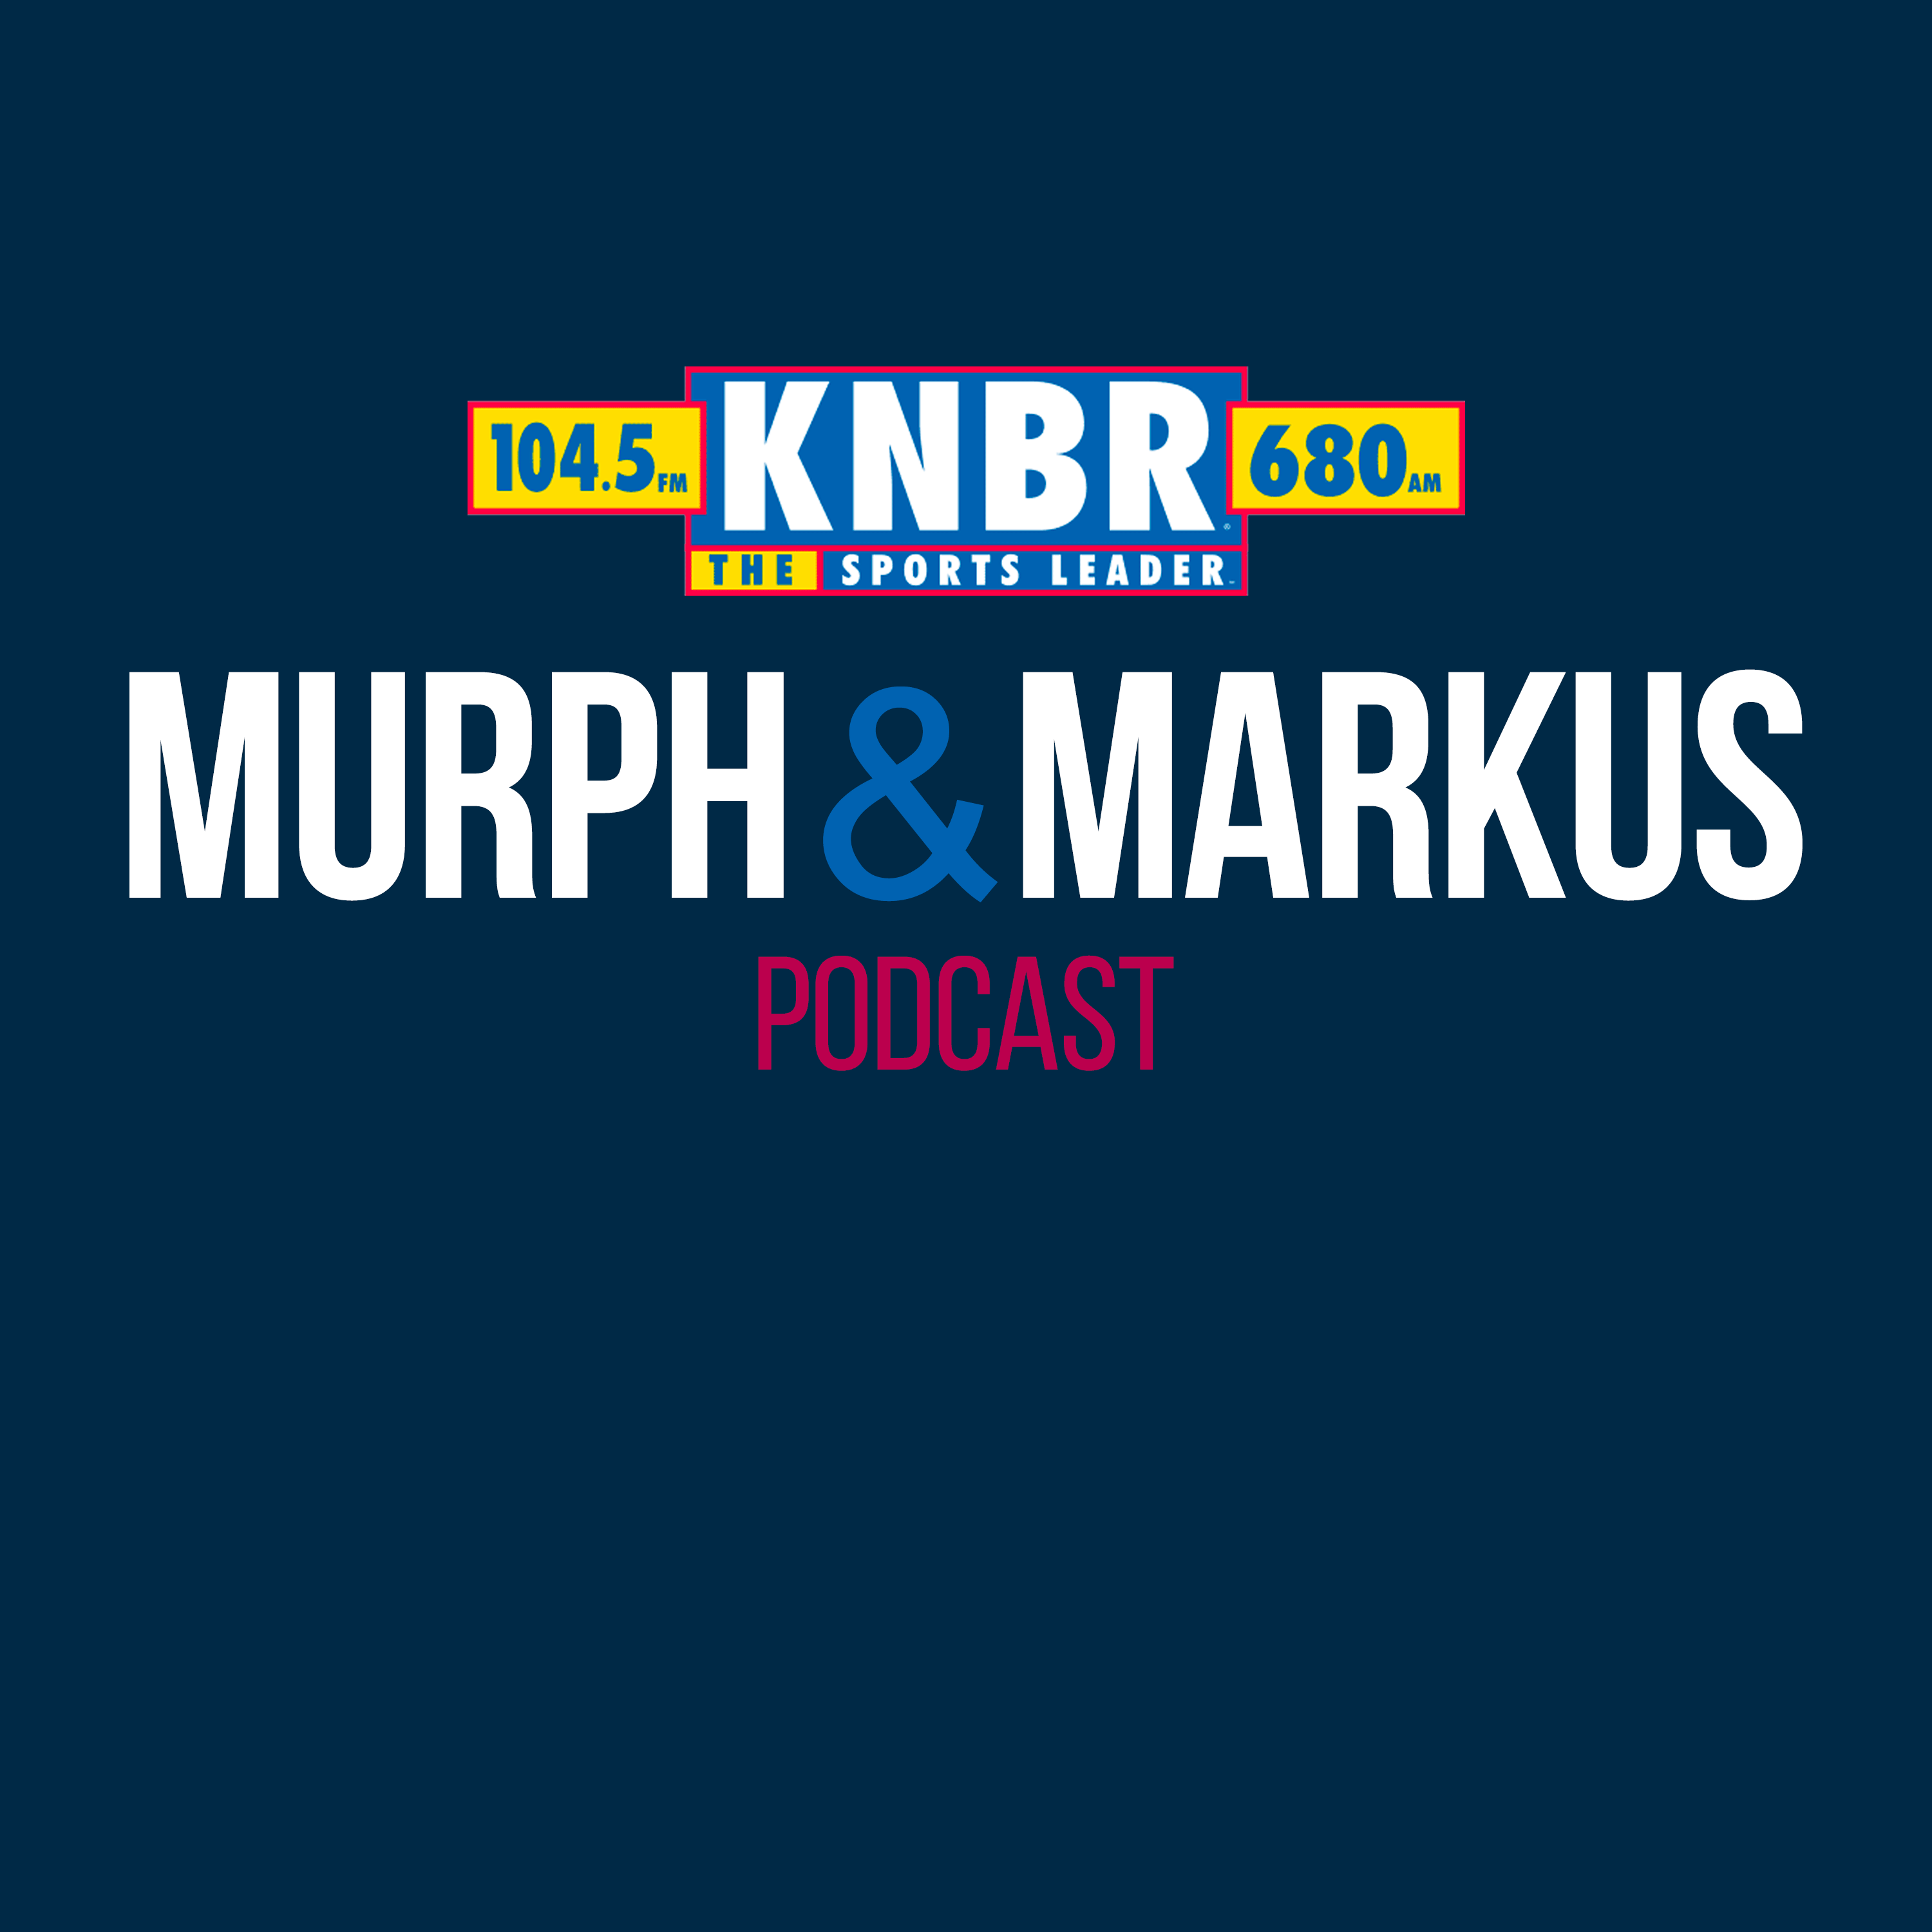 2-23 Pat Burrell joins Murph & Markus to discuss returning to a big league clubhouse as a coach and to give his perspective on Marco Luciano as a prospect